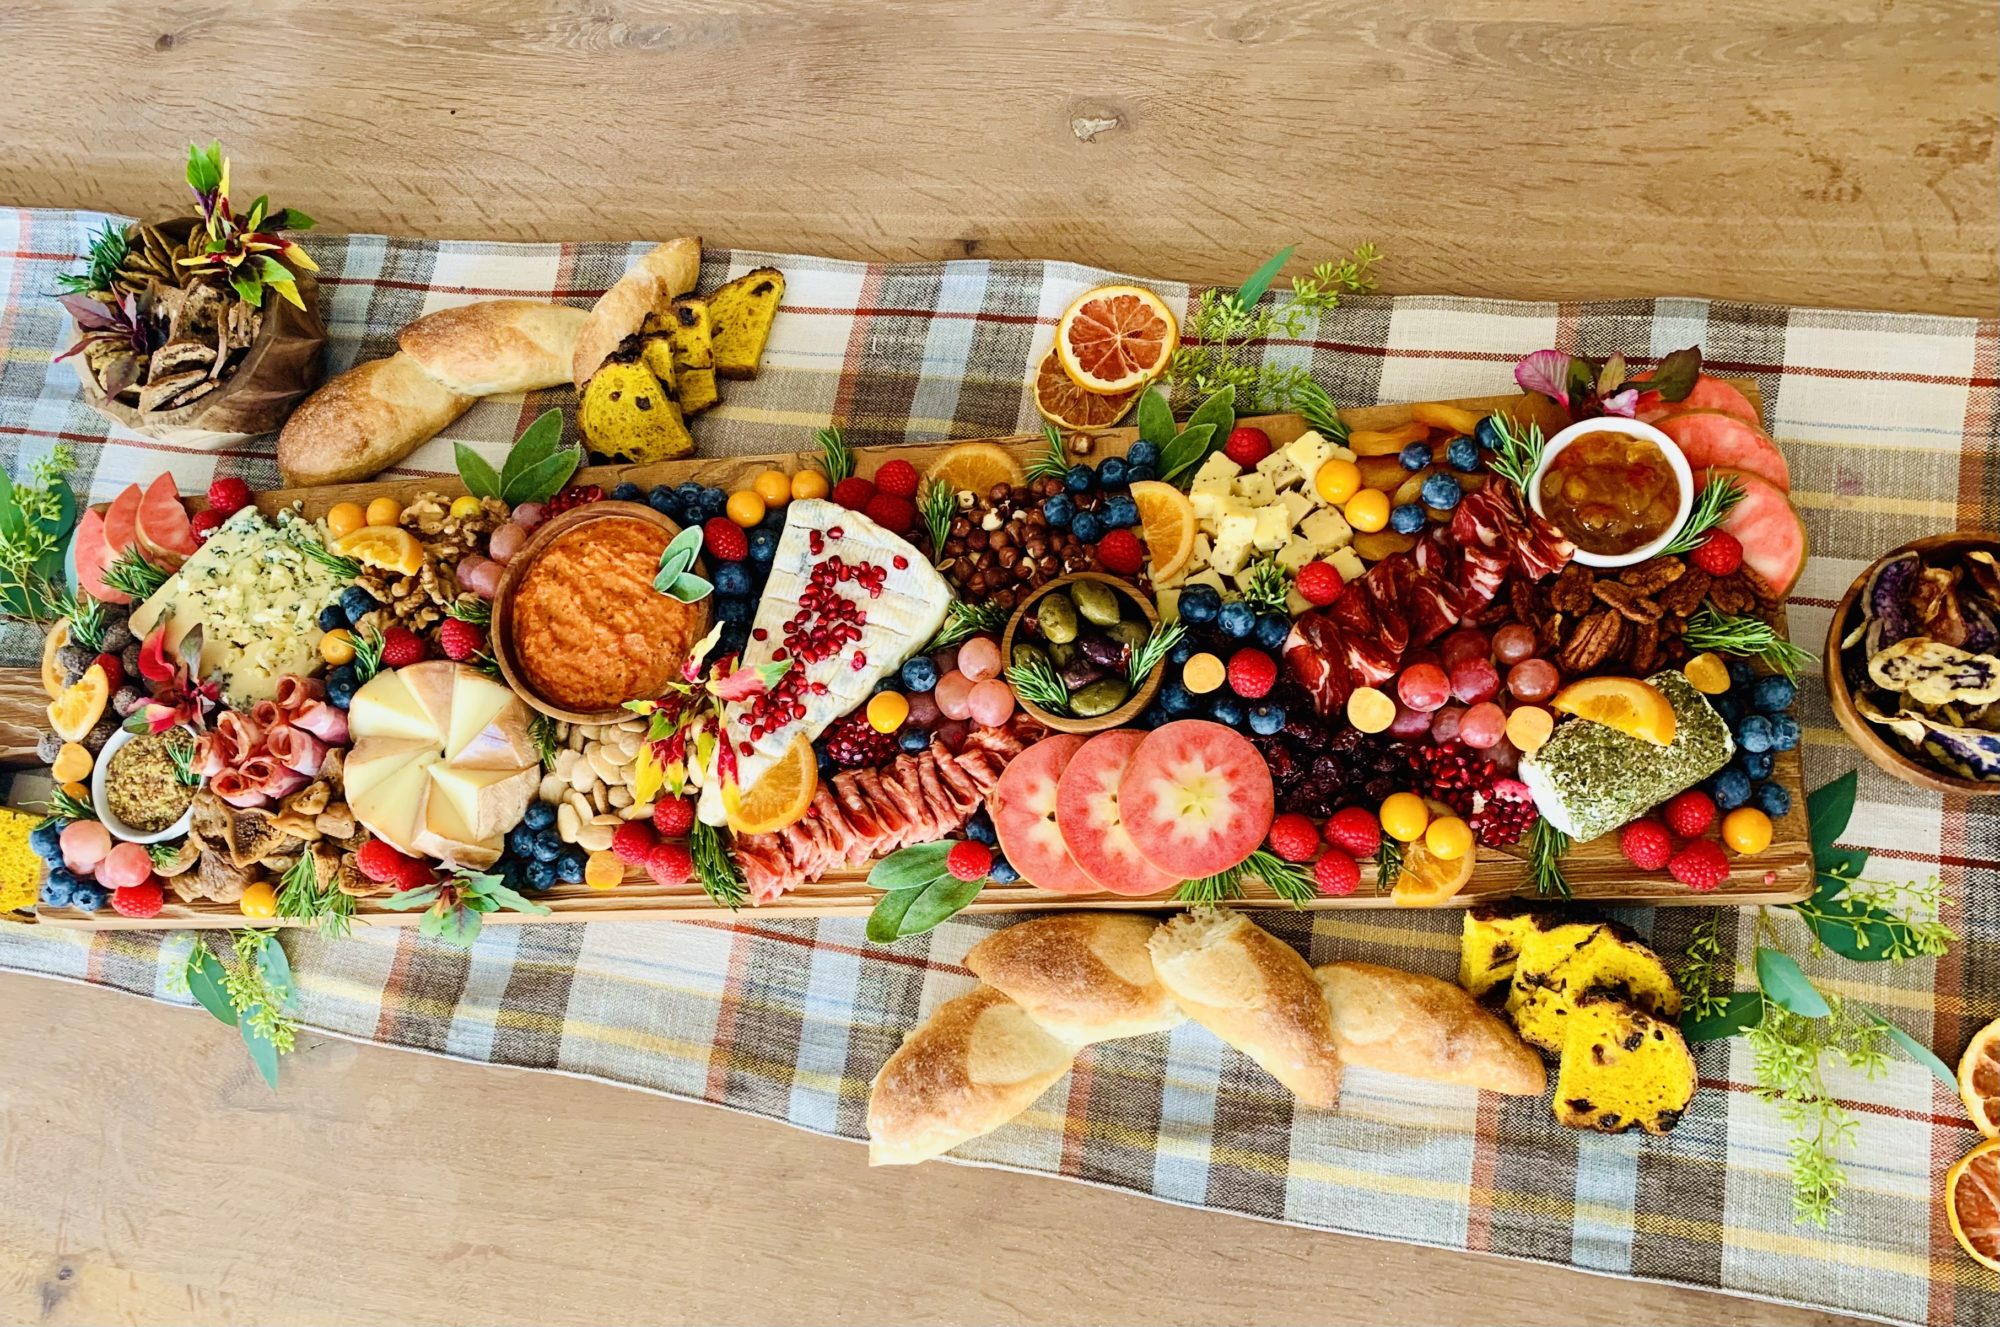 DIY This Edible Holiday Centerpiece With Groceries from Trader Joe's -  Sunset Magazine